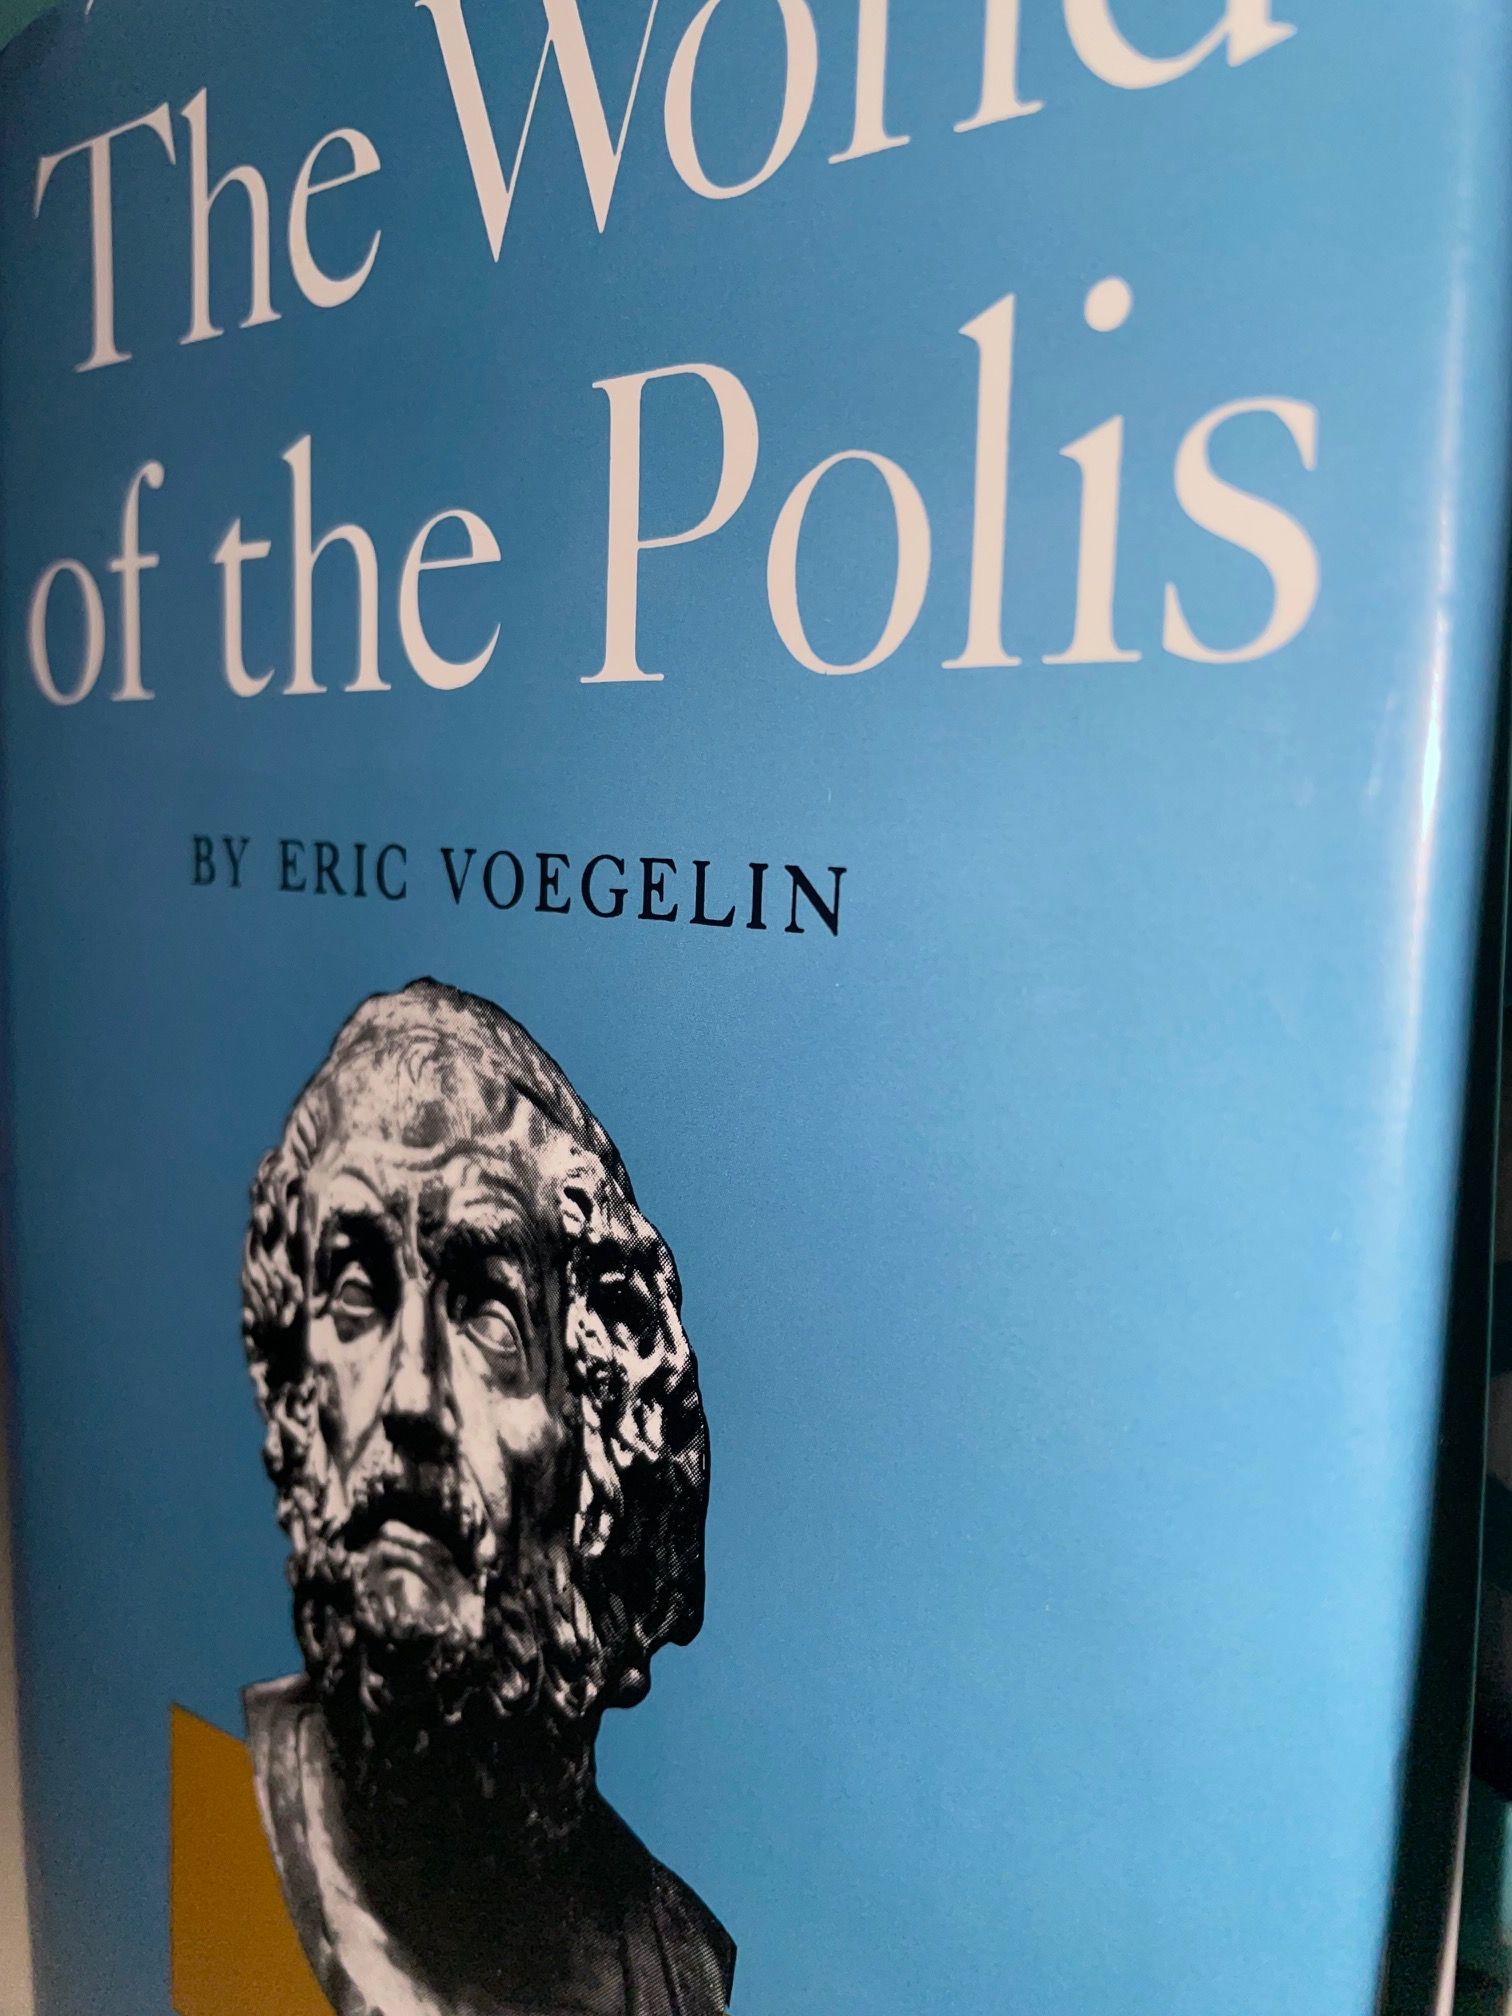 The World of the Polis, by Eric Voegelin